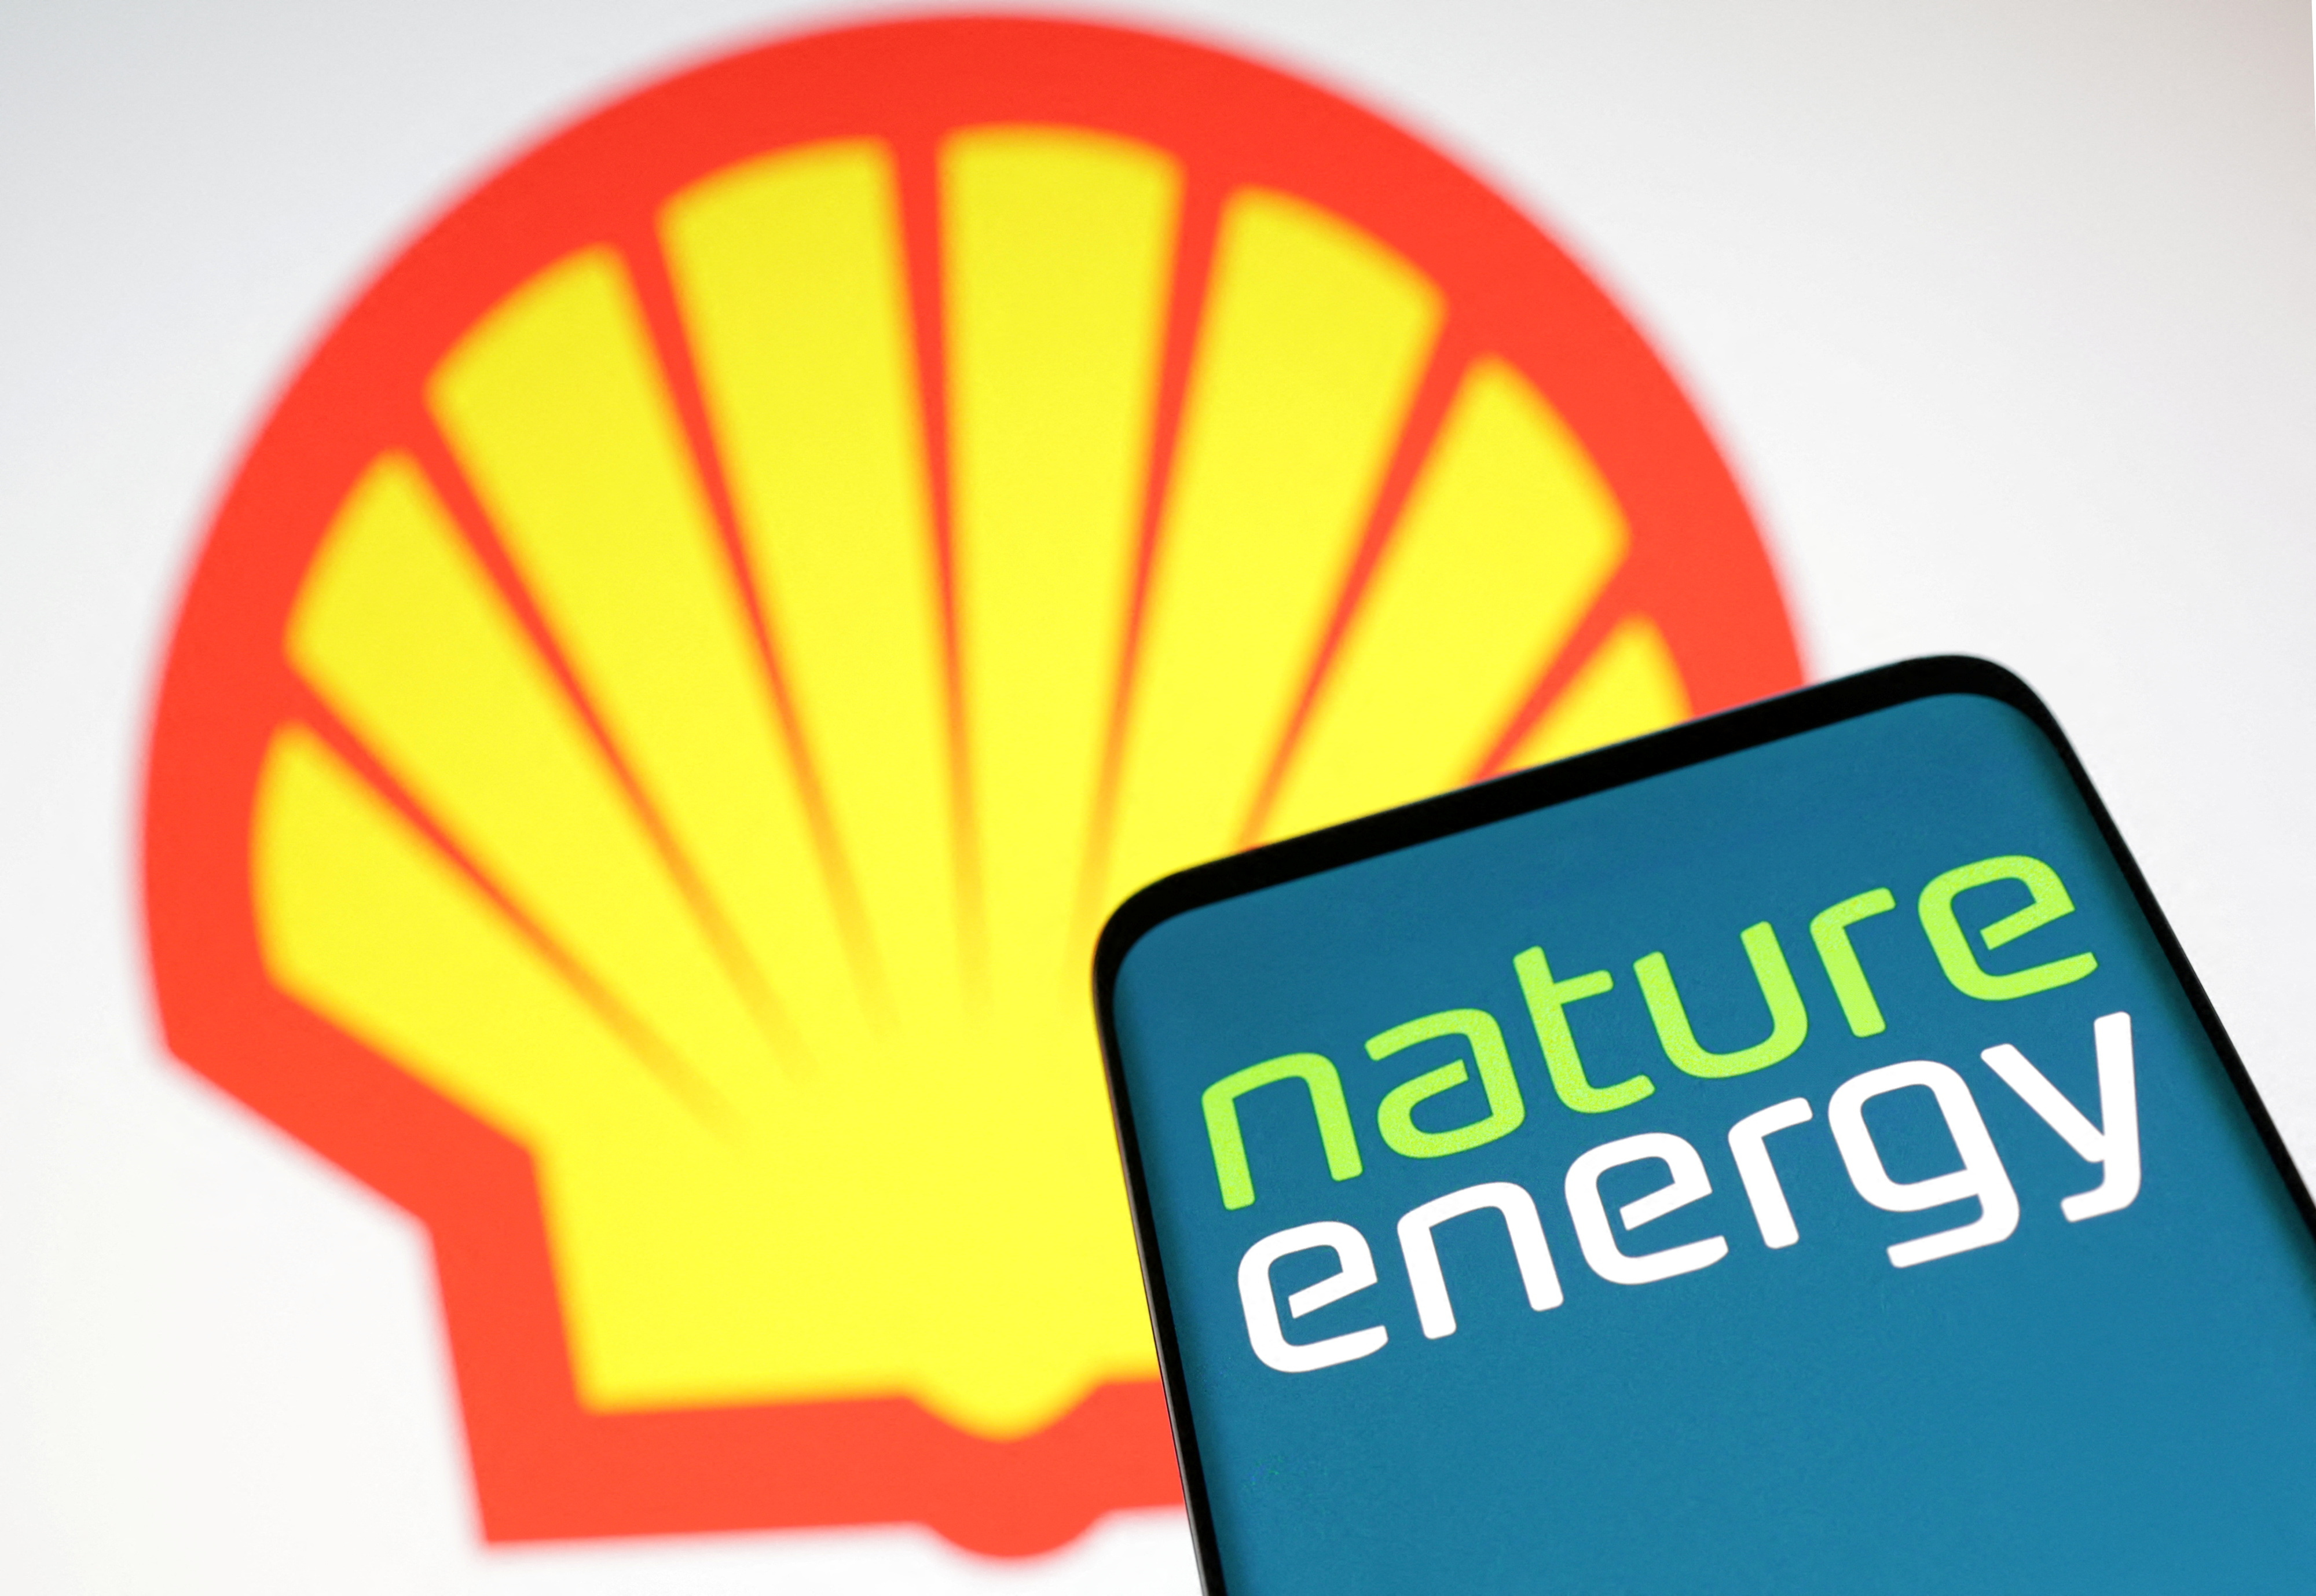 Illustration shows Shell and Nature Energy logos